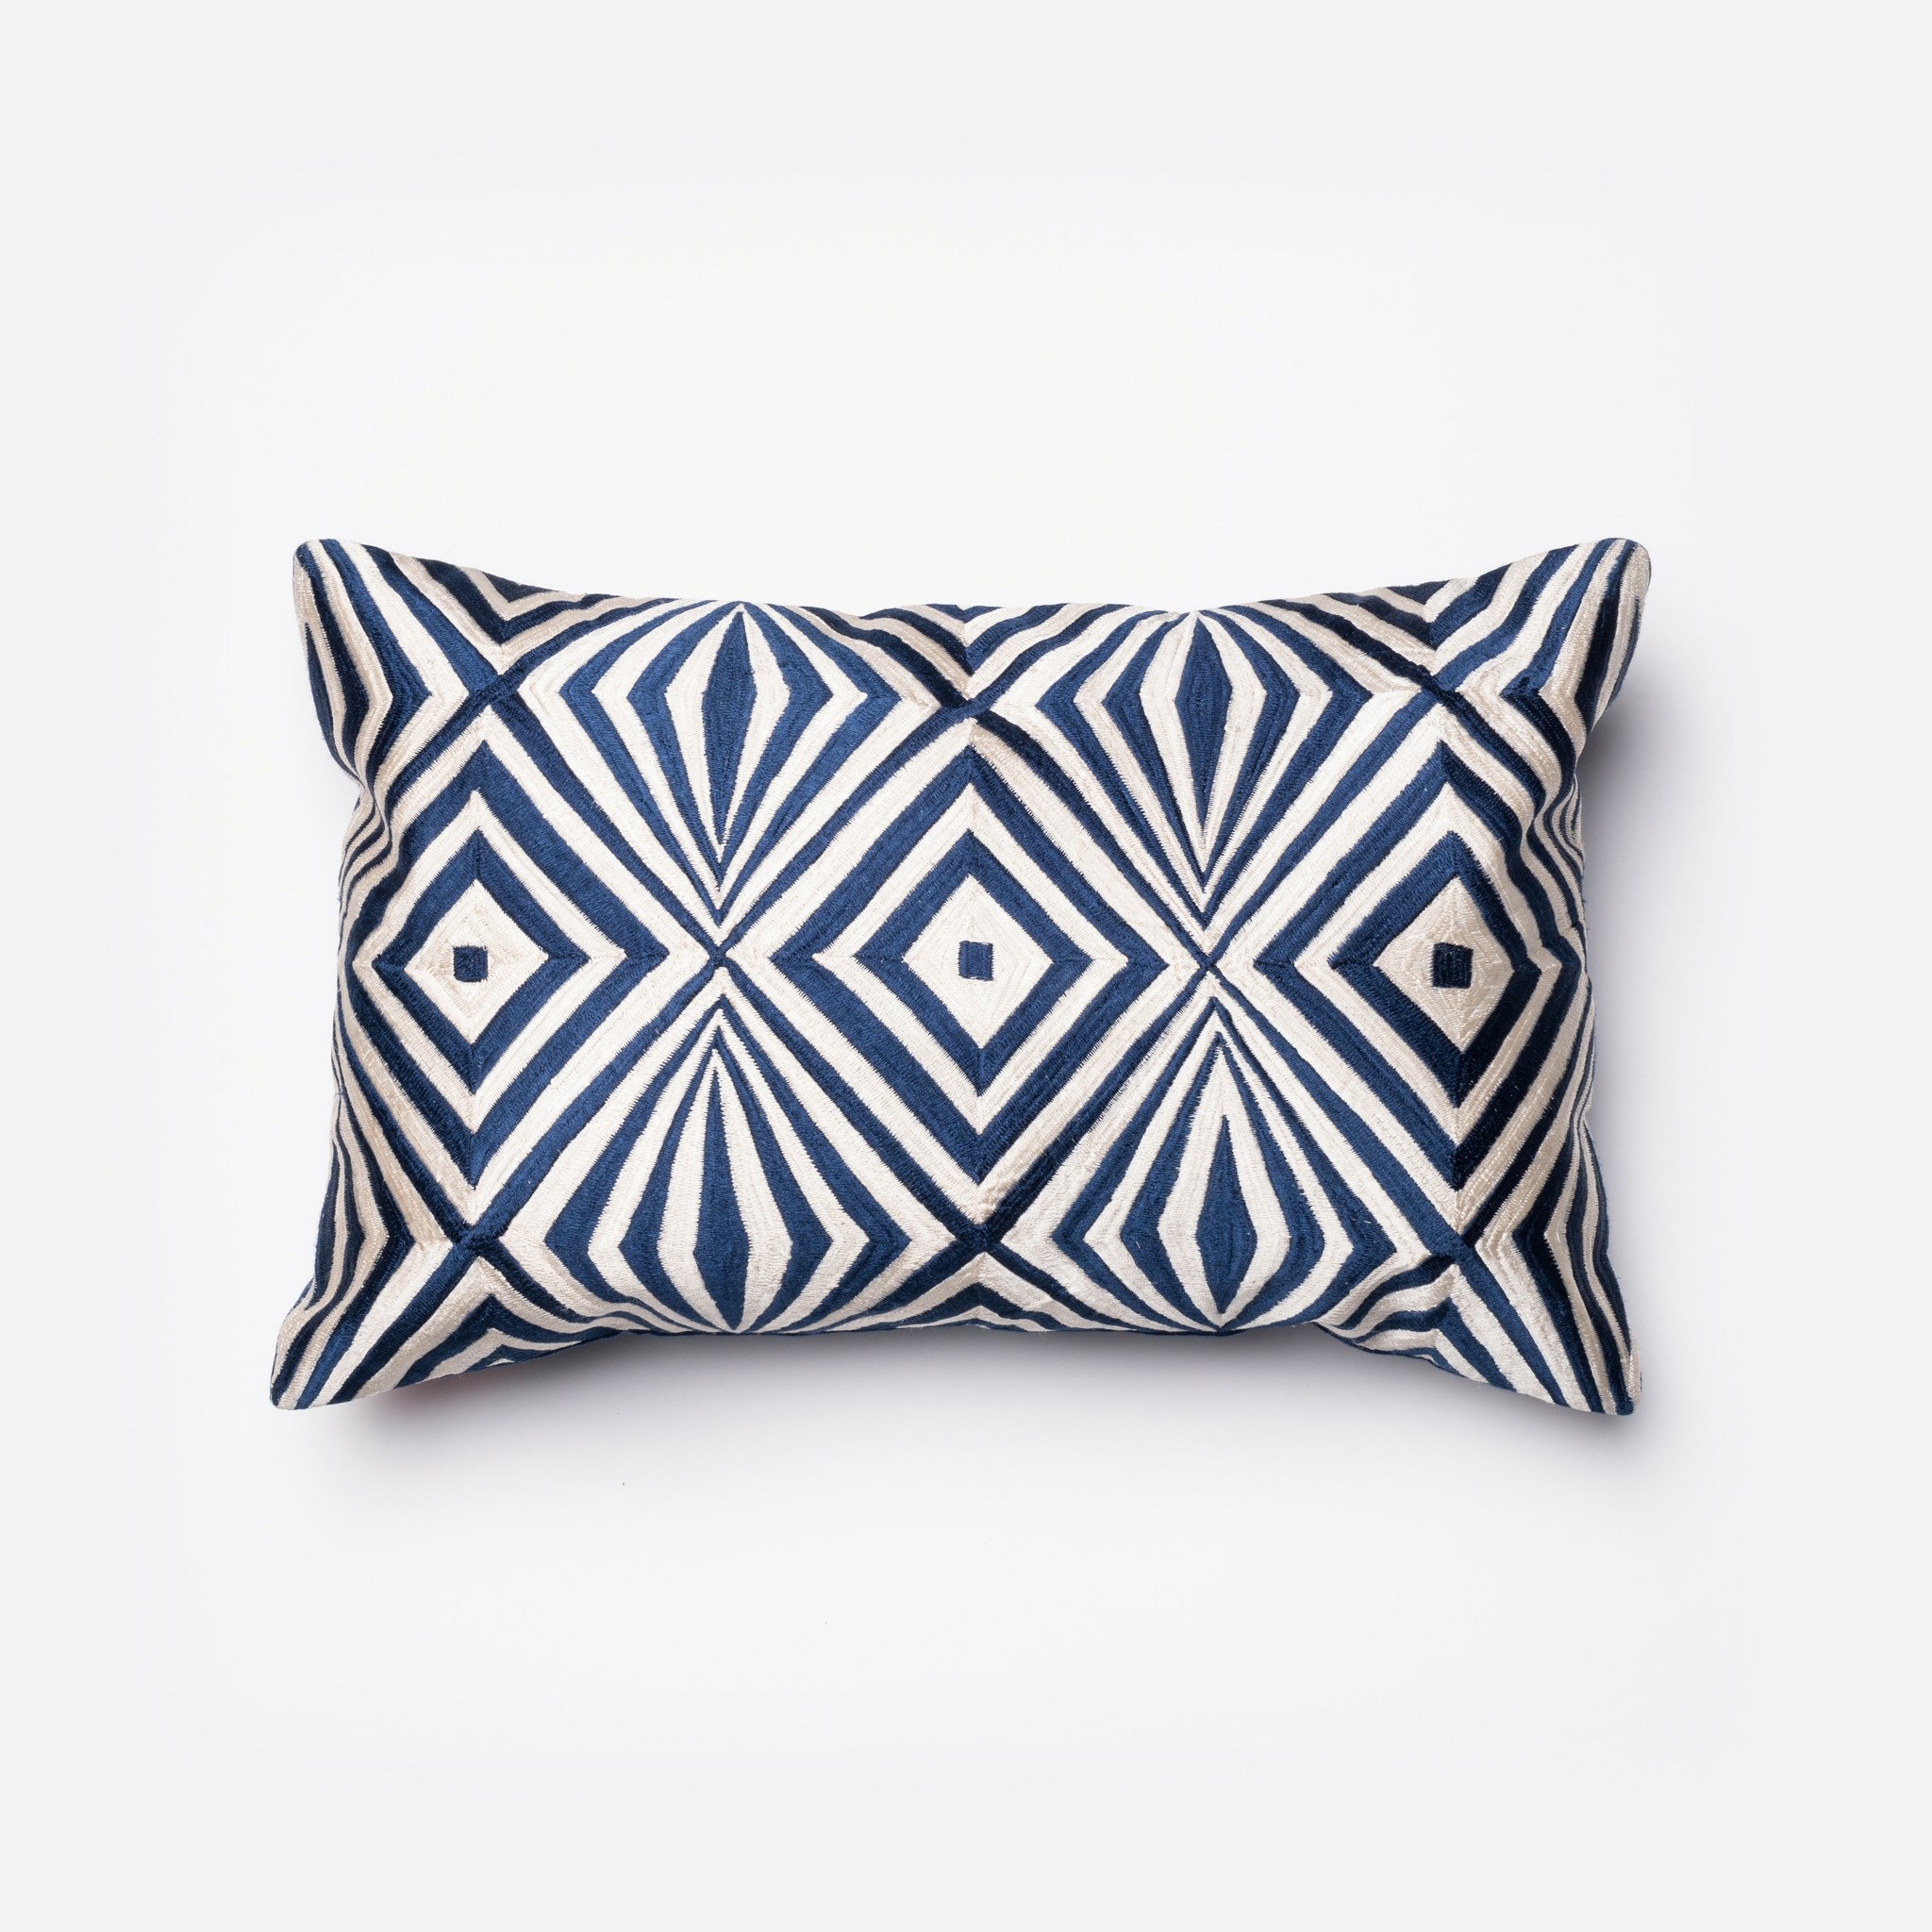 P0011 NAVY / IVORY Pillow - 13" x 21" with Down Insert - Image 0